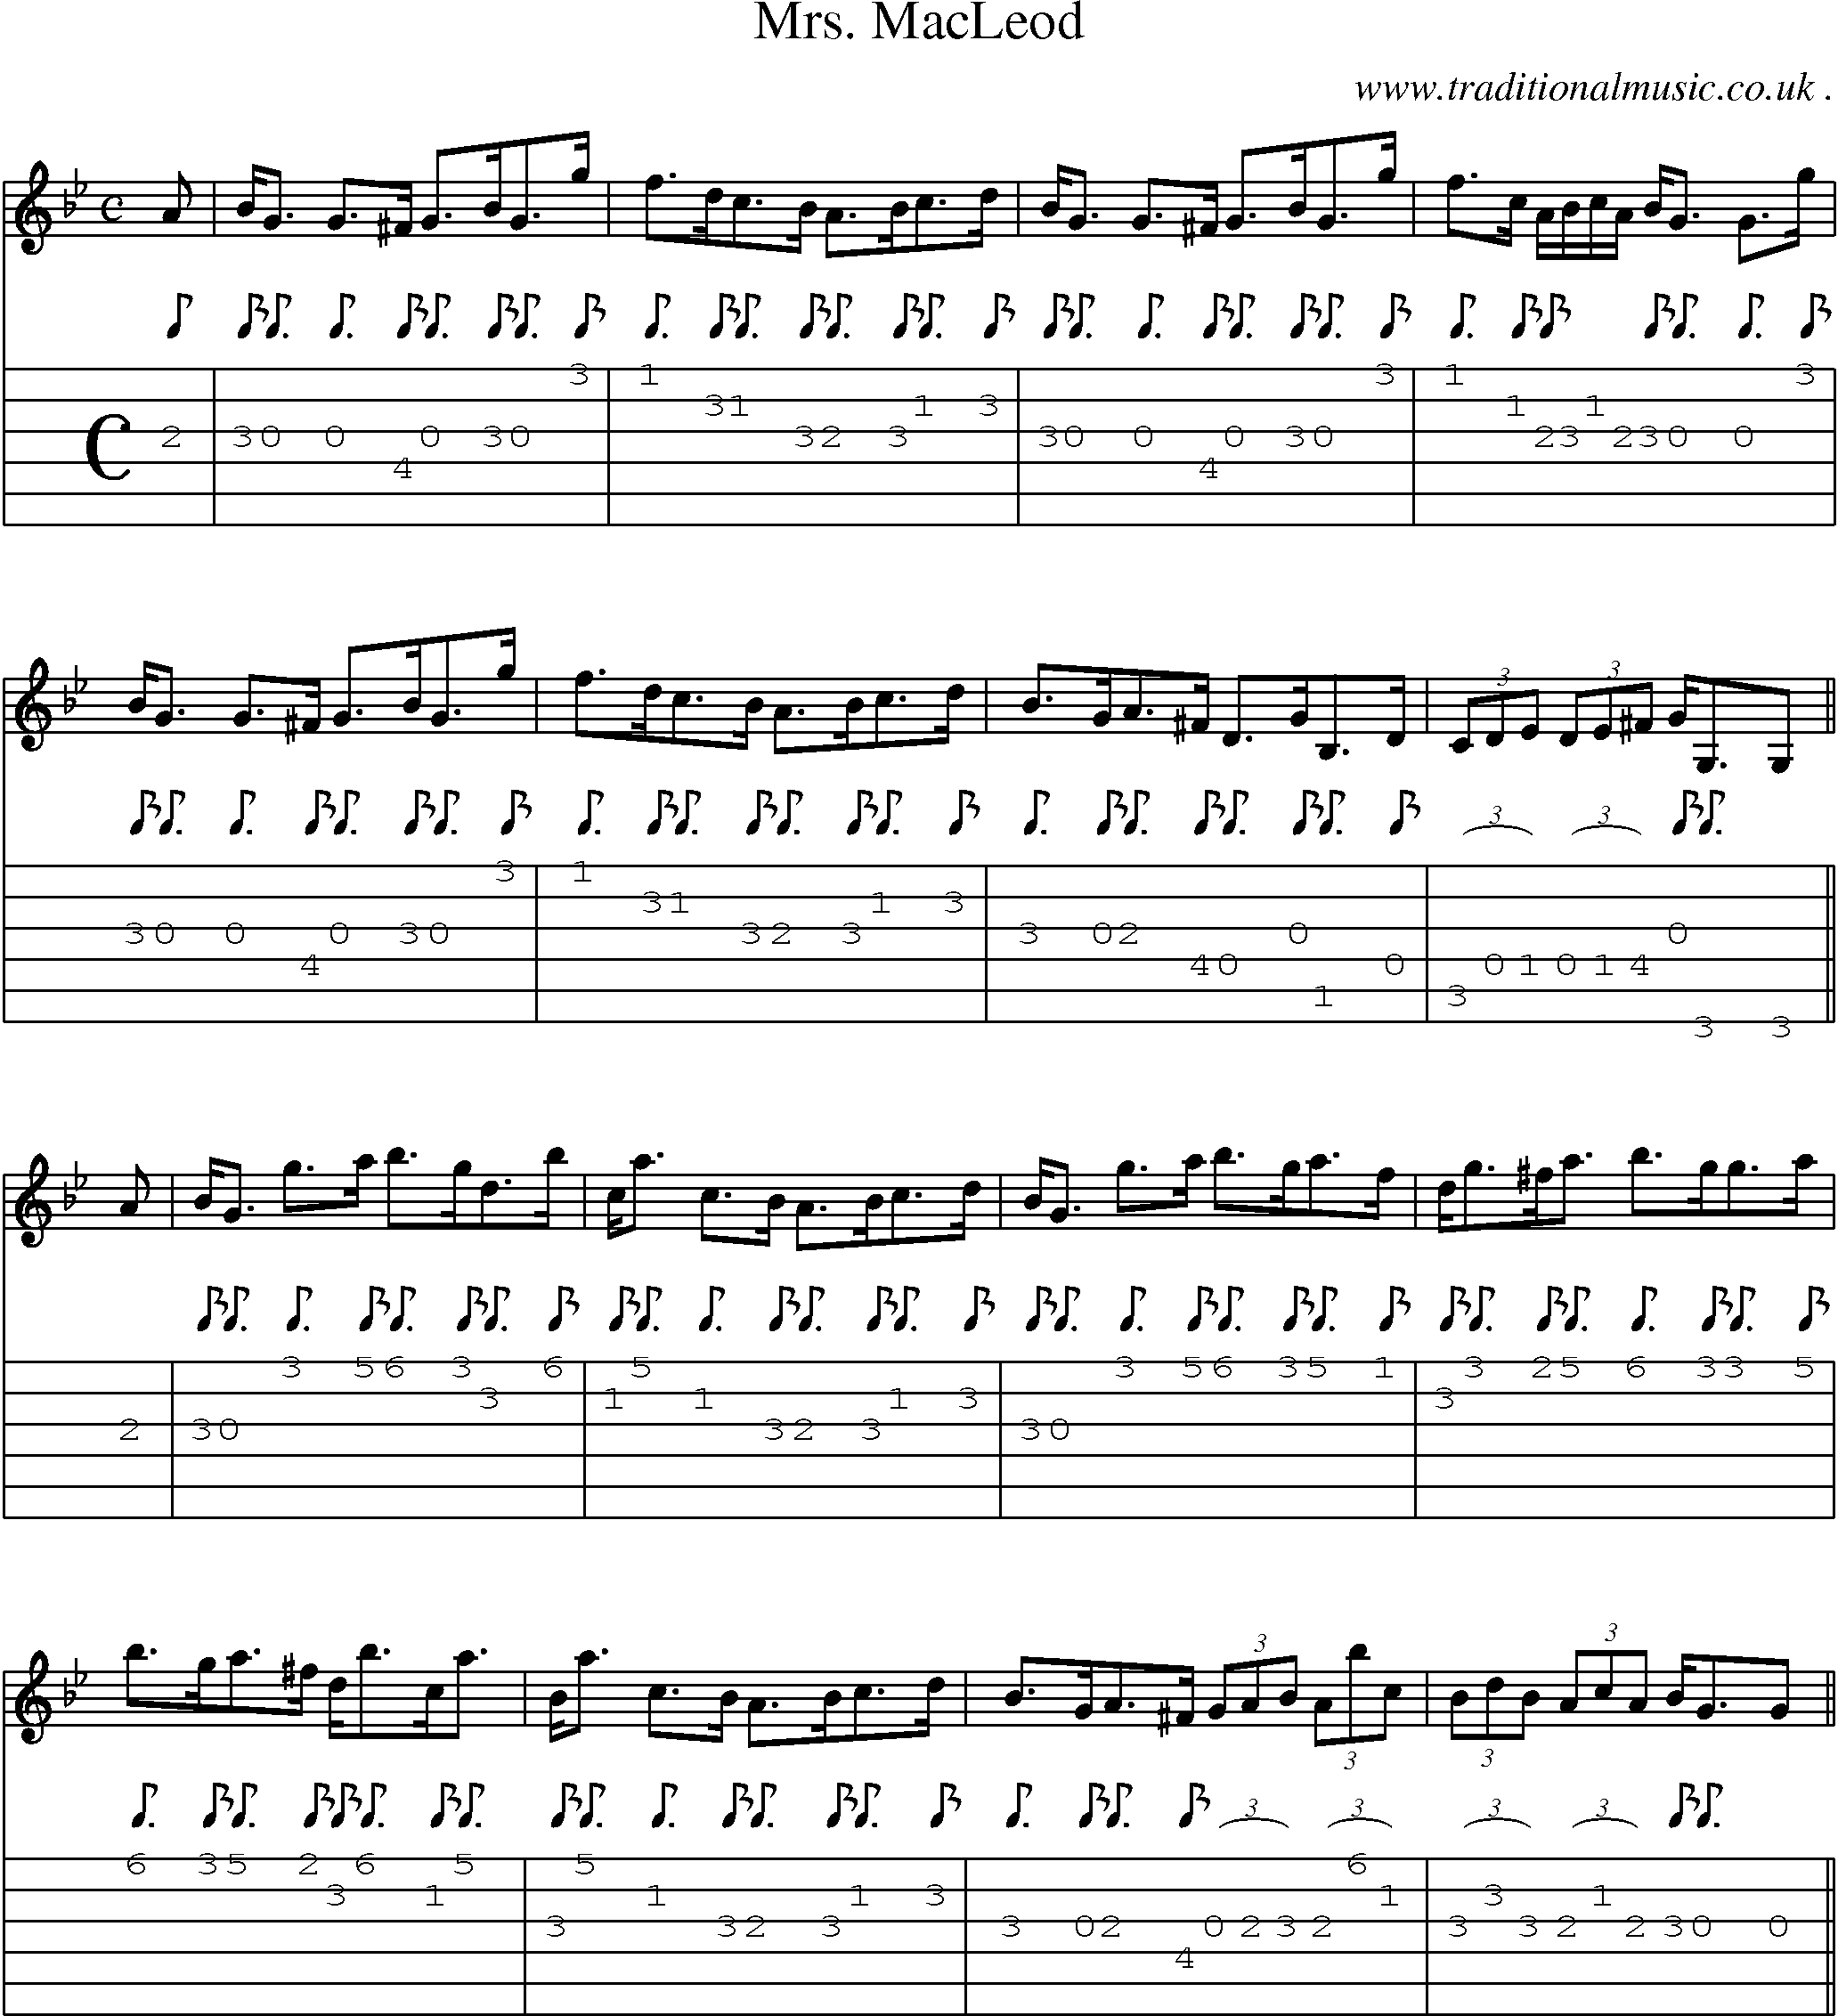 Sheet-music  score, Chords and Guitar Tabs for Mrs Macleod